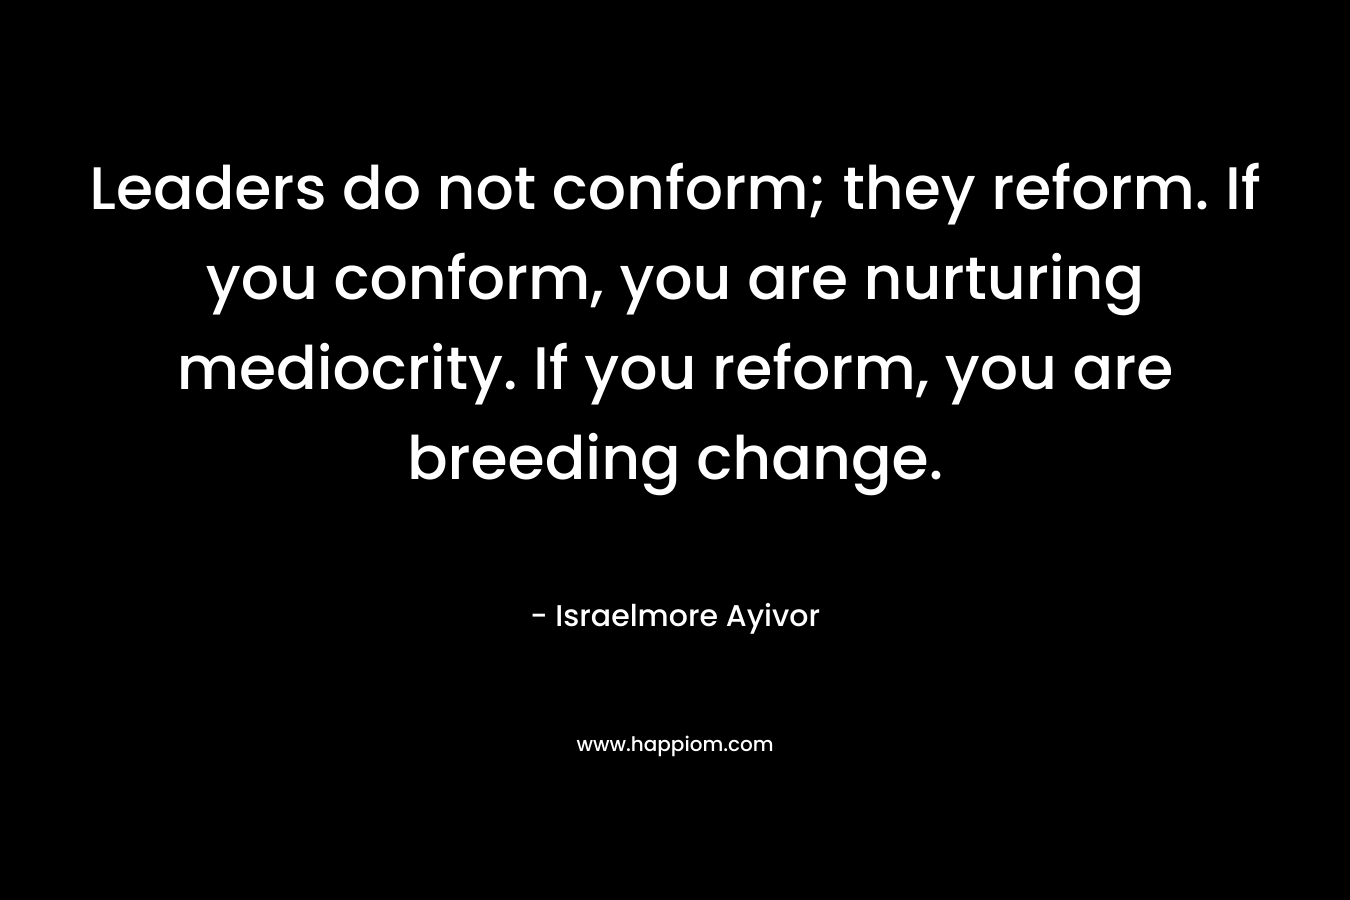 Leaders do not conform; they reform. If you conform, you are nurturing mediocrity. If you reform, you are breeding change.